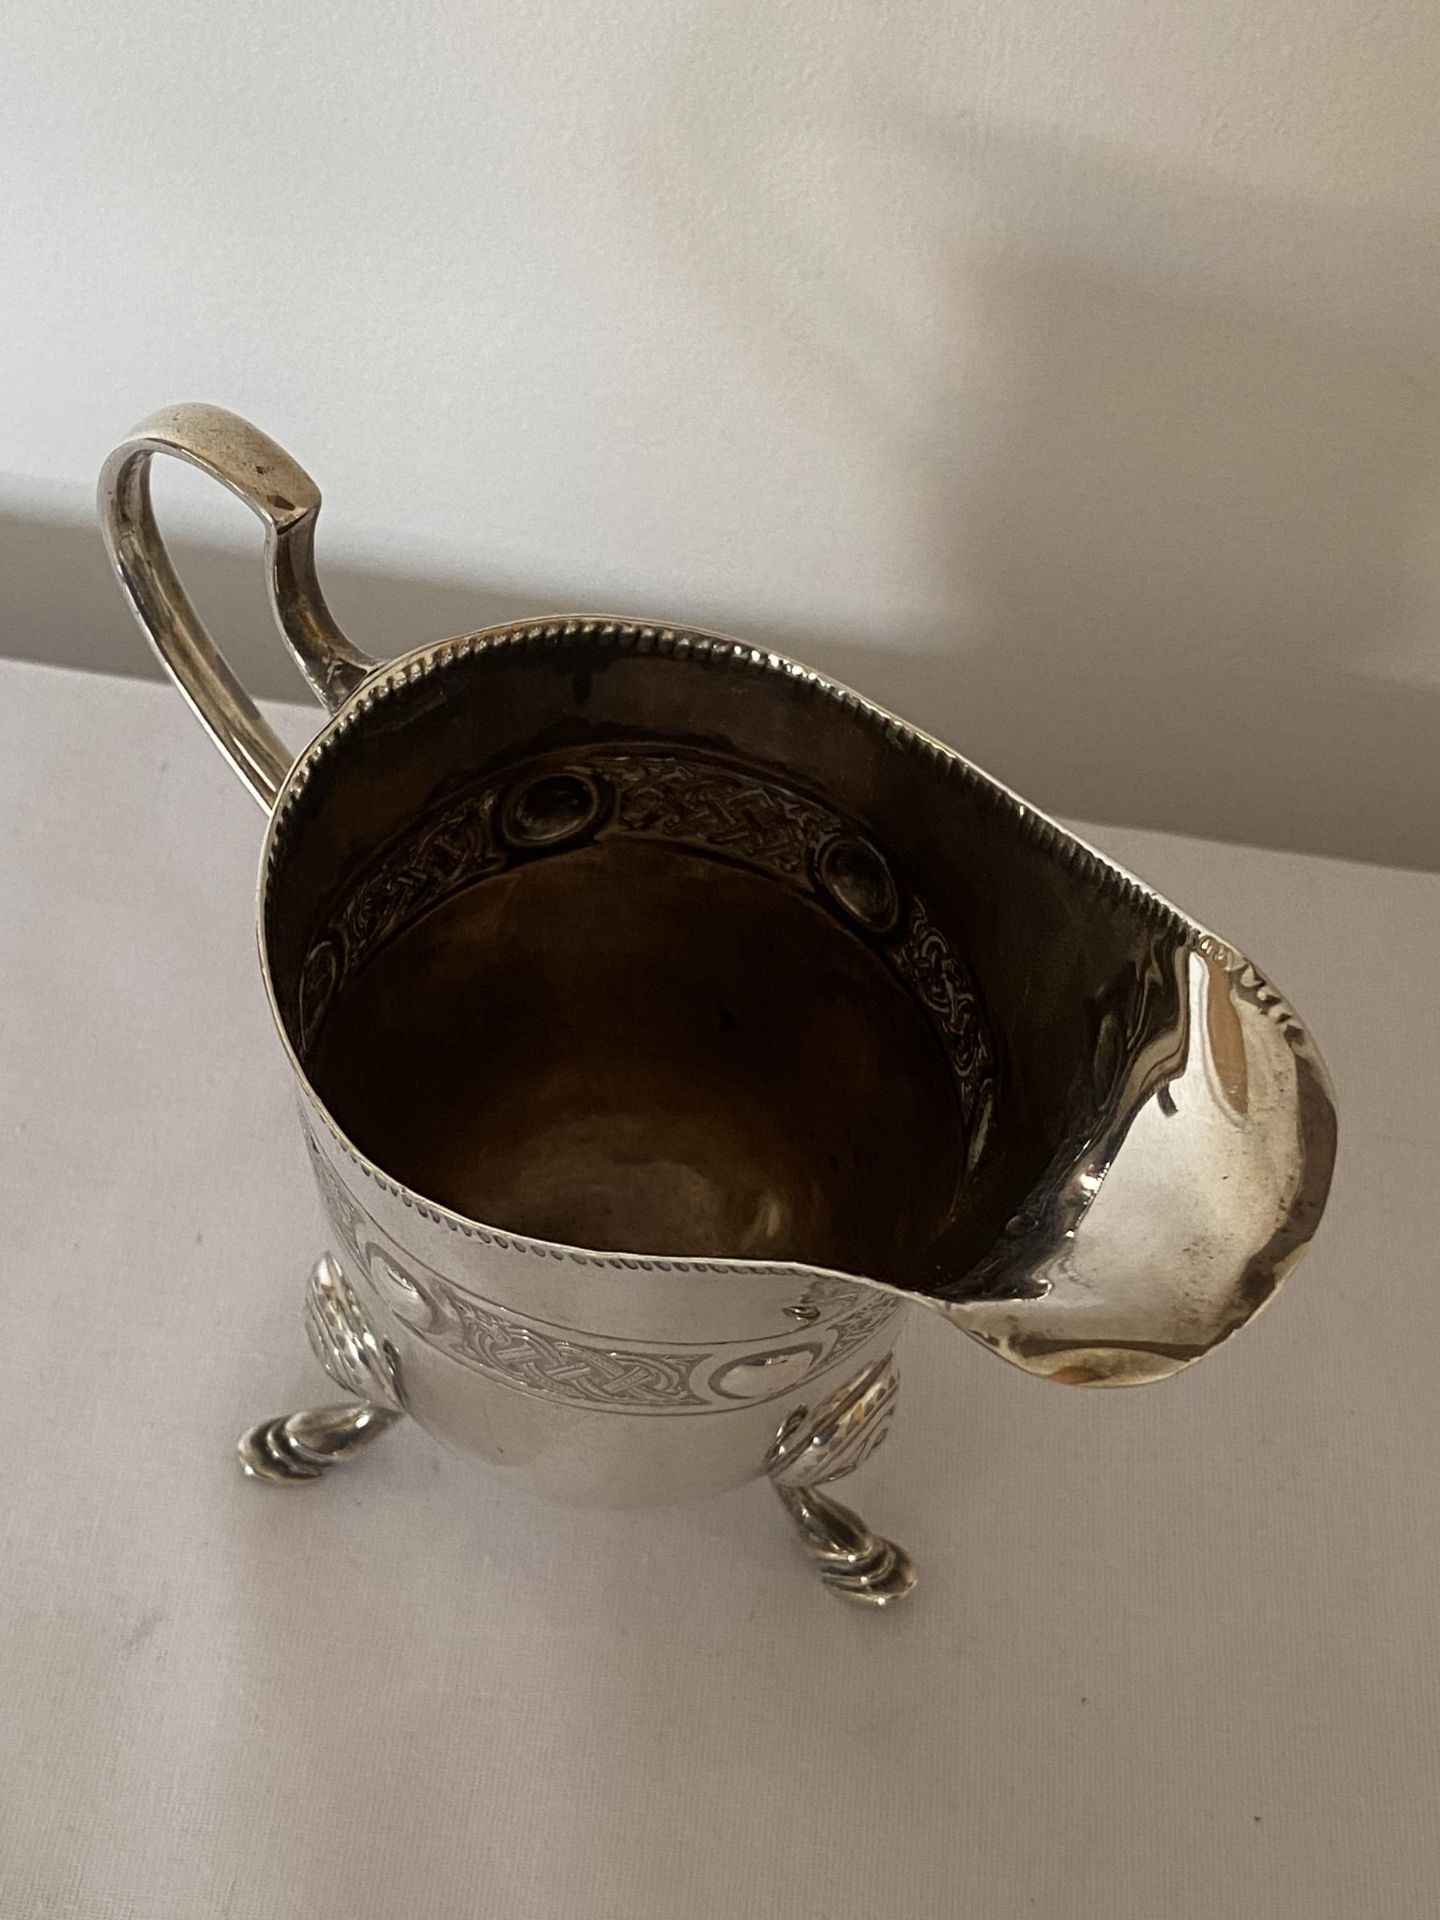 A GEORGE V 1917 HALLMARKED DUBLIN SILVER TANKARD, MAKER T WEIR & SONS, GROSS WEIGHT 163 GRAMS - Image 8 of 12